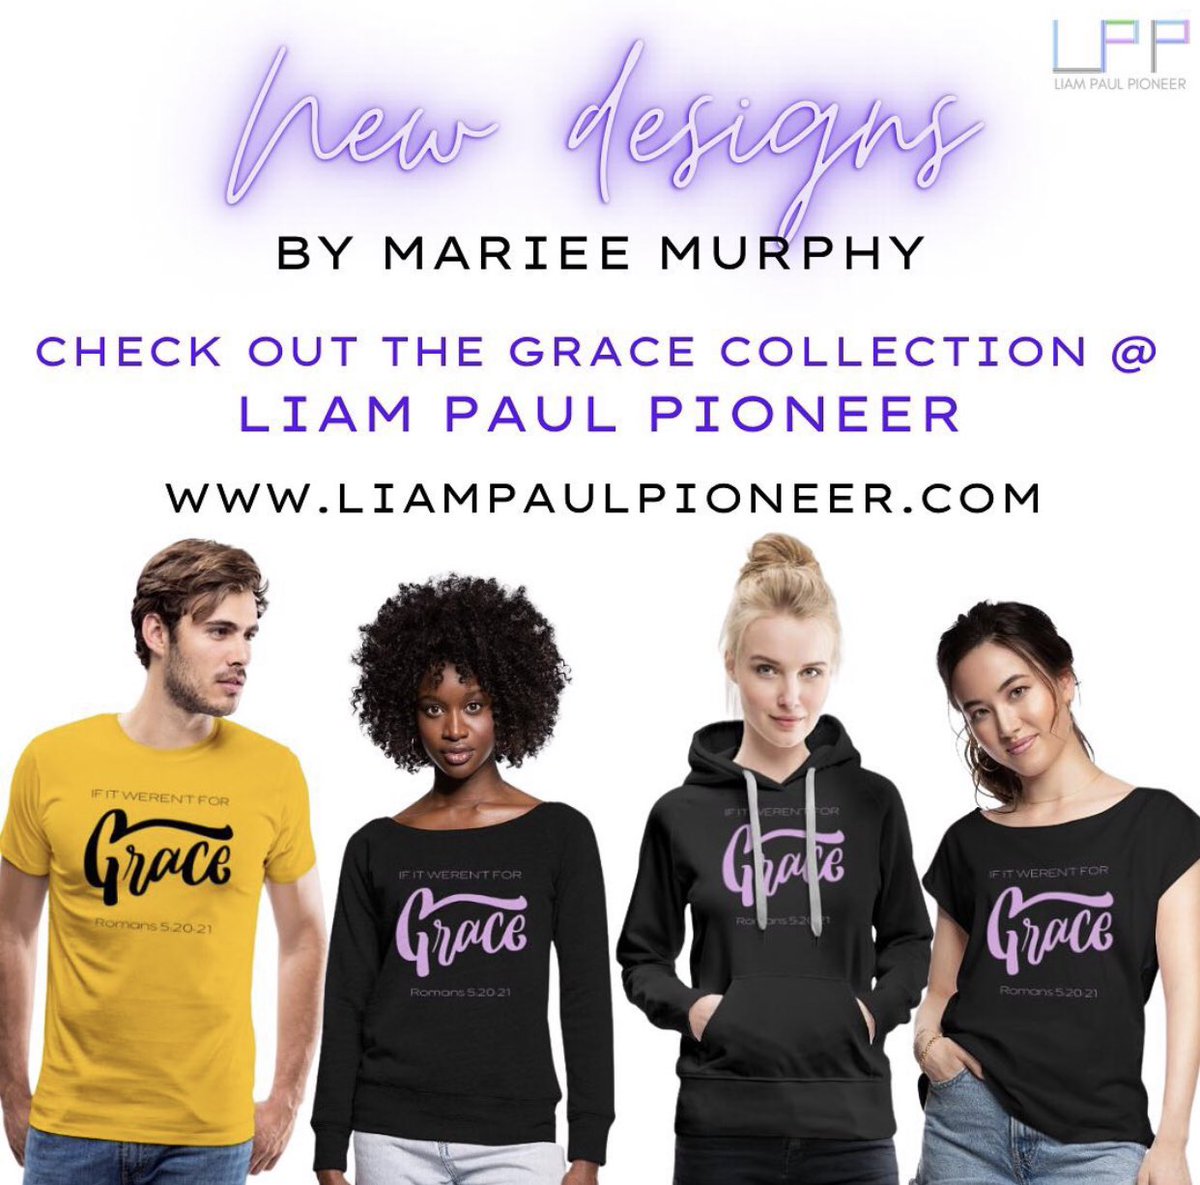 Check out the NEW GRACE COLLECTION by Mariee Murphy! Only at liampaulpioneer.com
#gracecollection #marieemurphy #tshirts #christiantshirts #faithclothes #christianfashion #christianclothes #grace #Jesus #liampaulpioneer